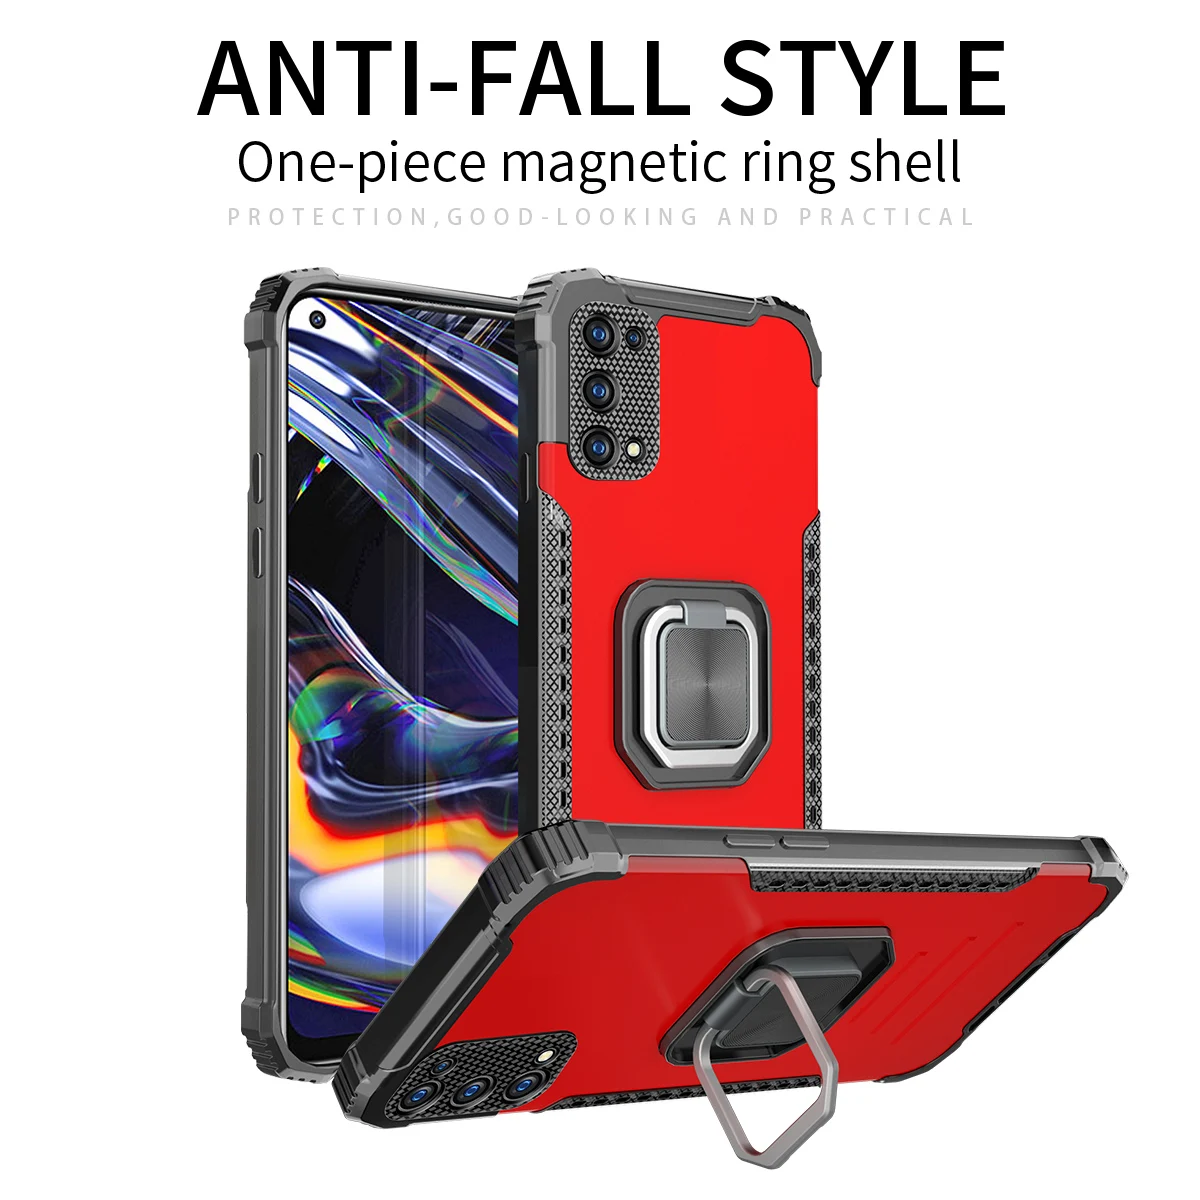 

Magnetic Metal Ring Stand Armor Shockproof Case For Realme 5 6 7 Pro 5i 6i 7i C11 C12 C15 C17 C20 C21 Aluminum Alloy Back Cover